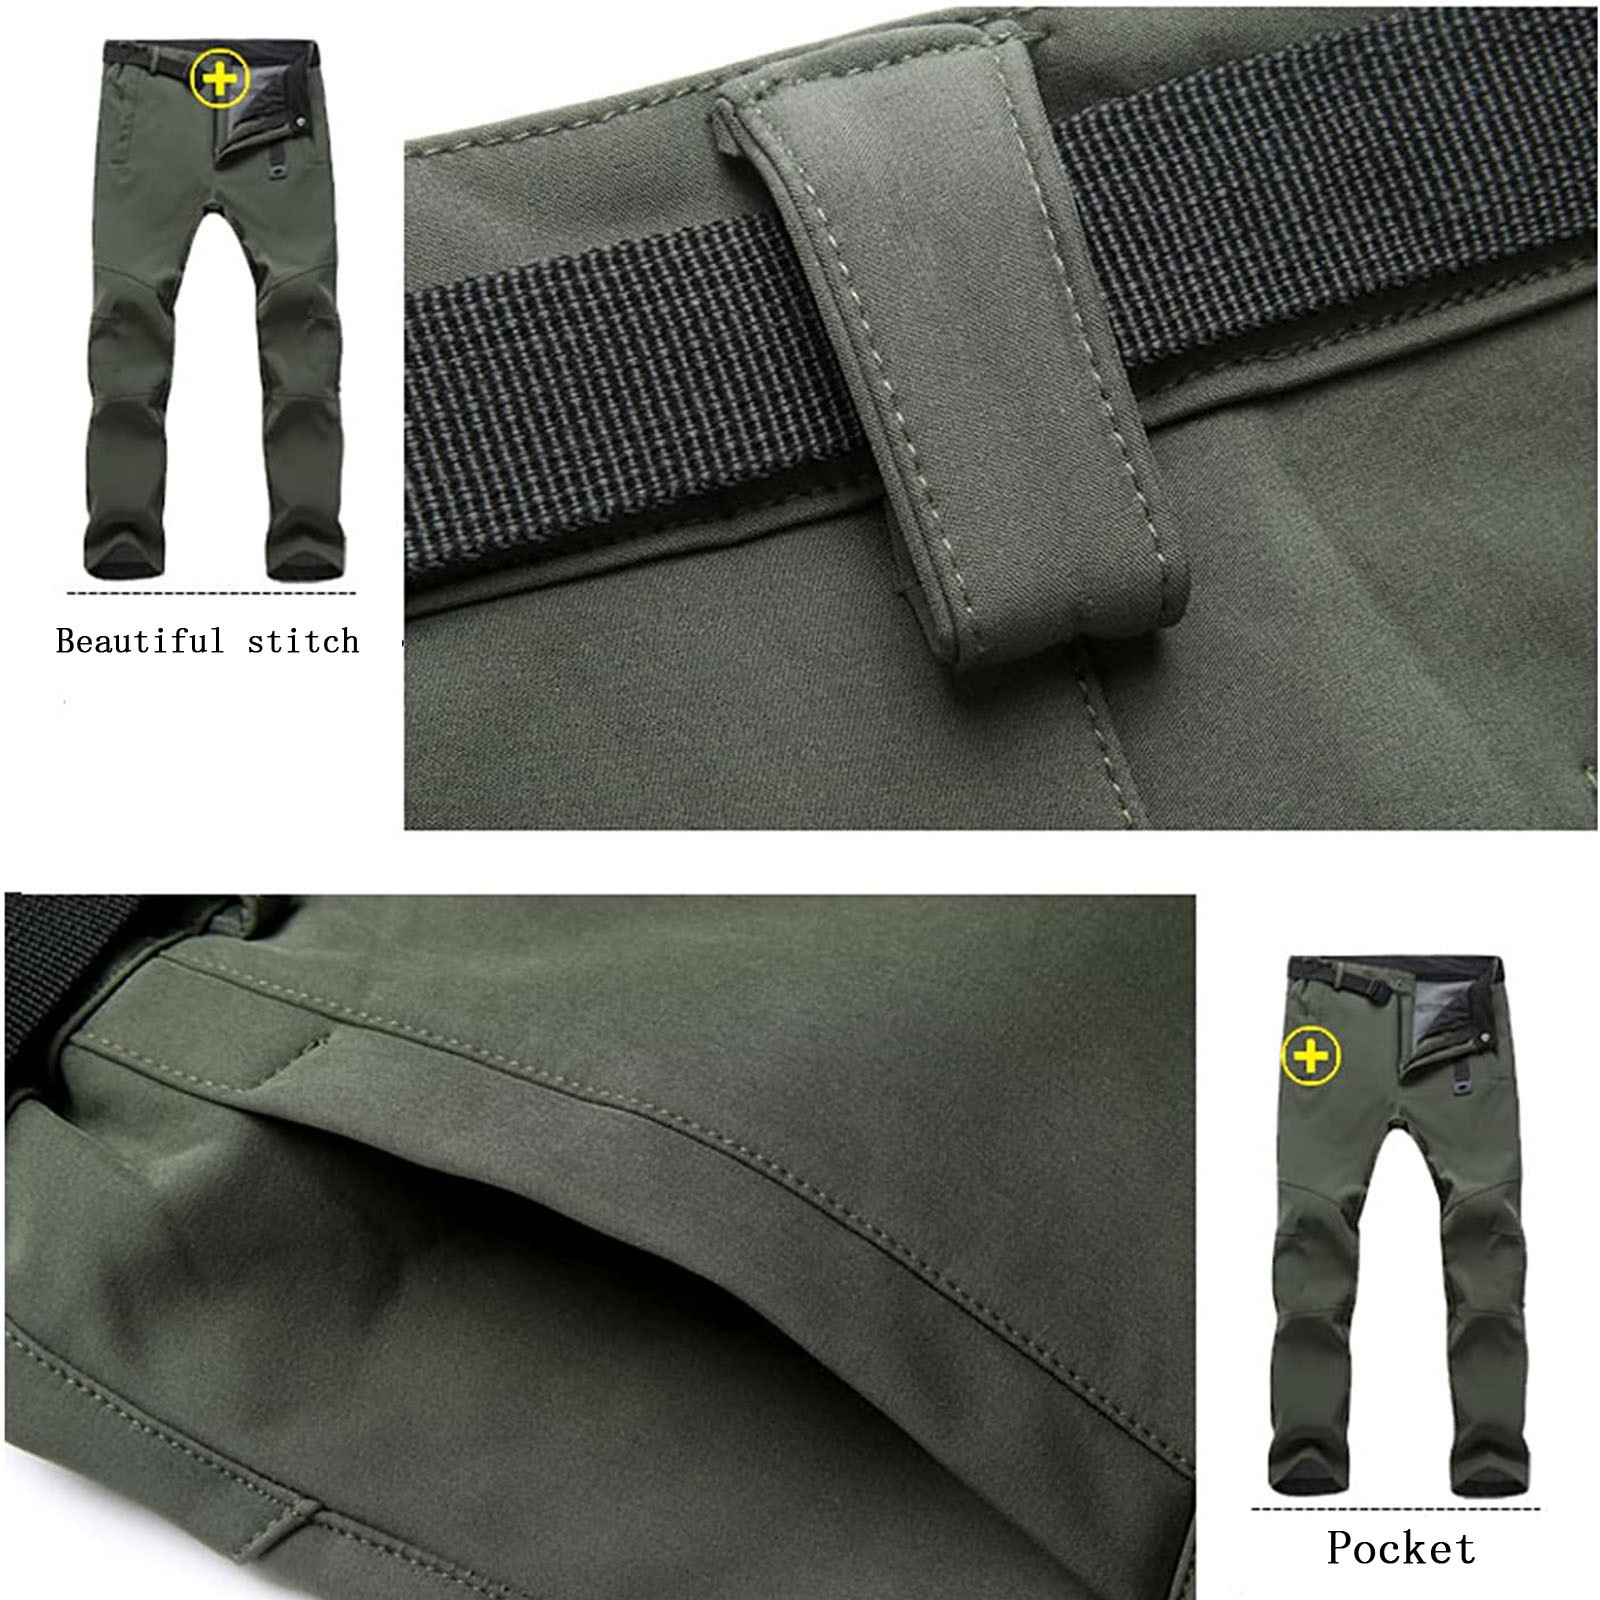 Outdoor Pants Hiking Pants Thick Fall Winter Thermal Fleece Sweat Absorbent Casual Men Hiking Pants Outdoor Camping#c